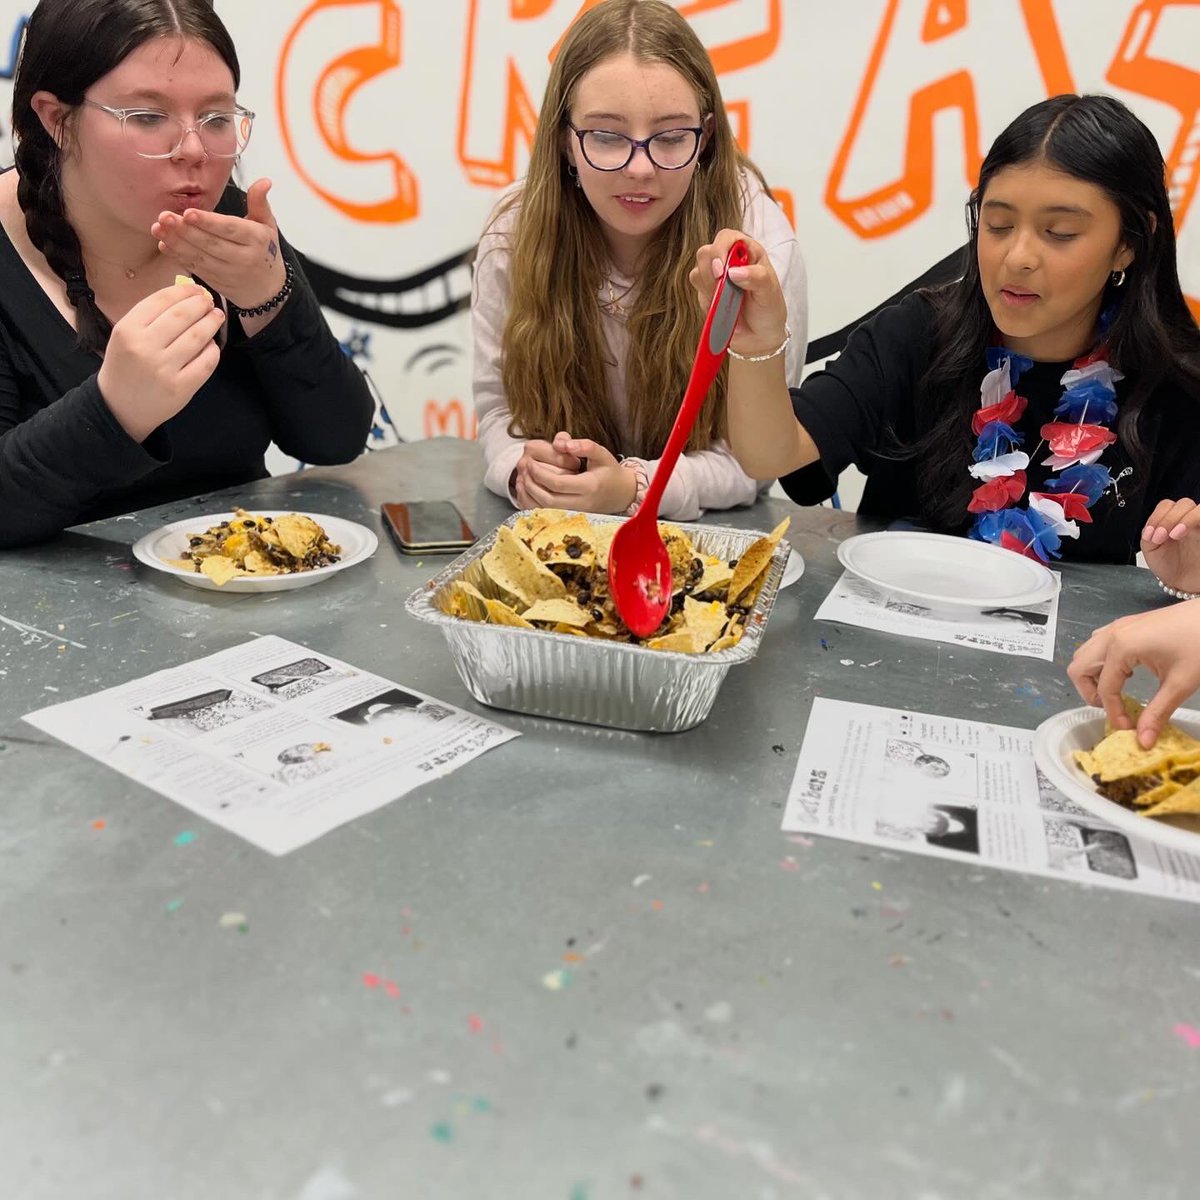 Did somebody say nachos?? 👀😋 Our Breathe Culinary Arts class sure does know how to make a tasty dinner! 

#lightofchance #breatheyoutharts #youtharts #music #dance #visualarts #culinary #creativewriting #madisonvilleky #bowlinggreenky